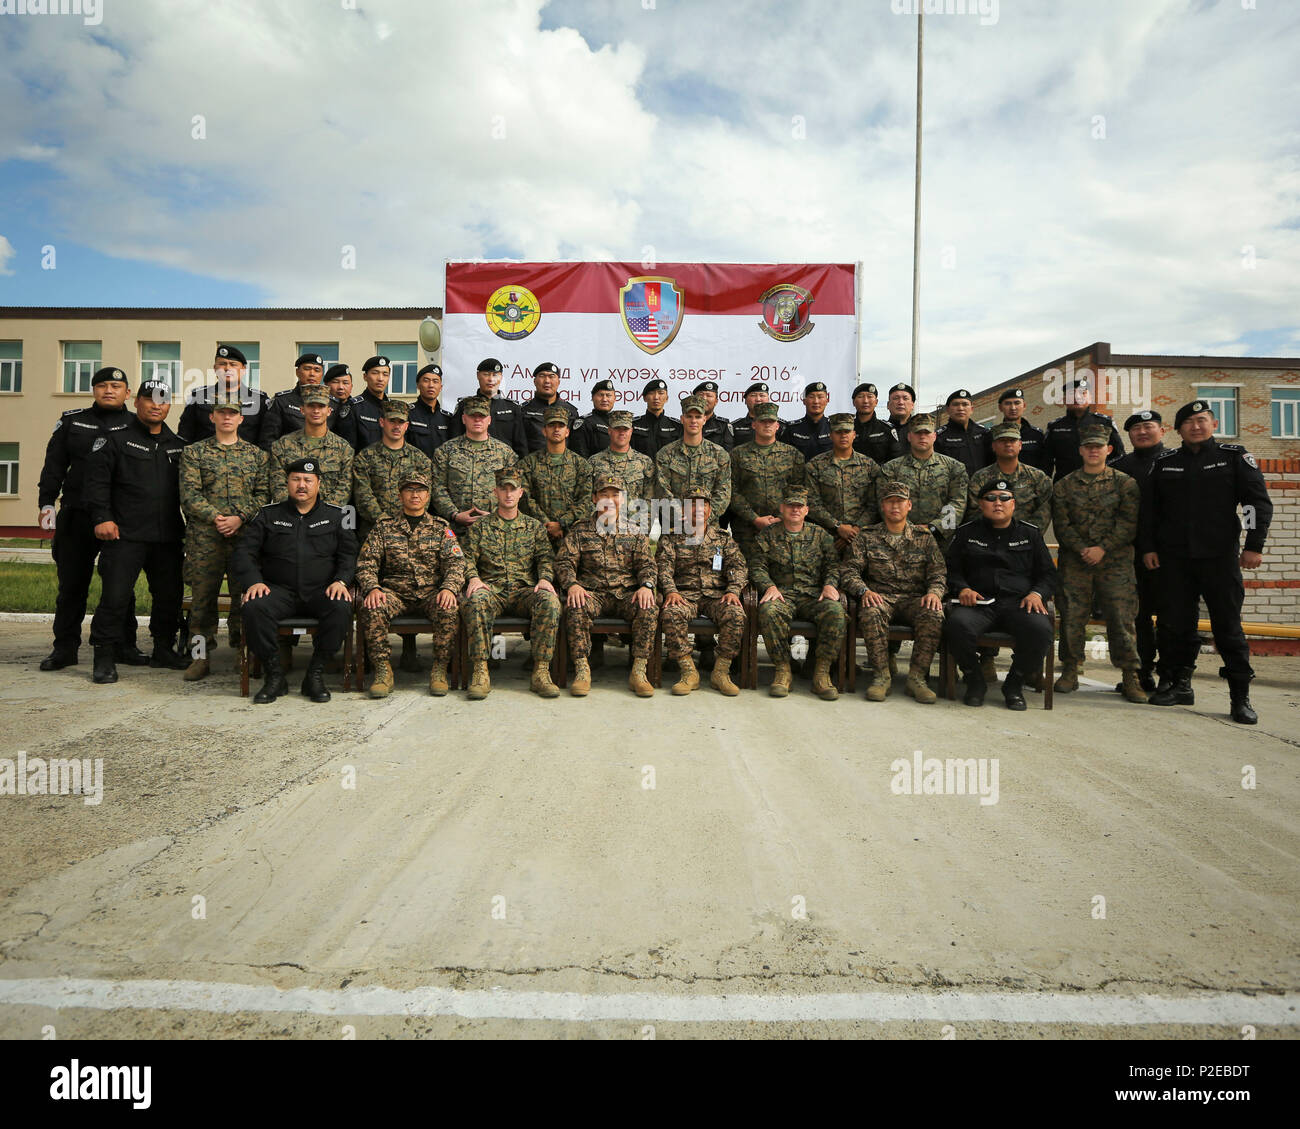 Mongolian police officers pose for a group photo with U.S. Marines and Mongolian Armed Forces leadership during the opening ceremony for Non-Lethal Weapons Executive Seminar (NOLES) 2016 at the Five Hills Training Area, Mongolia, Sept. 12, 2016. NOLES is a regularly scheduled field training exercise and leadership seminar hosted annually by various nations throughout Asia-Pacific. (U.S. Marine Corps photo by Cpl. Jonathan E. LopezCruet) Stock Photo